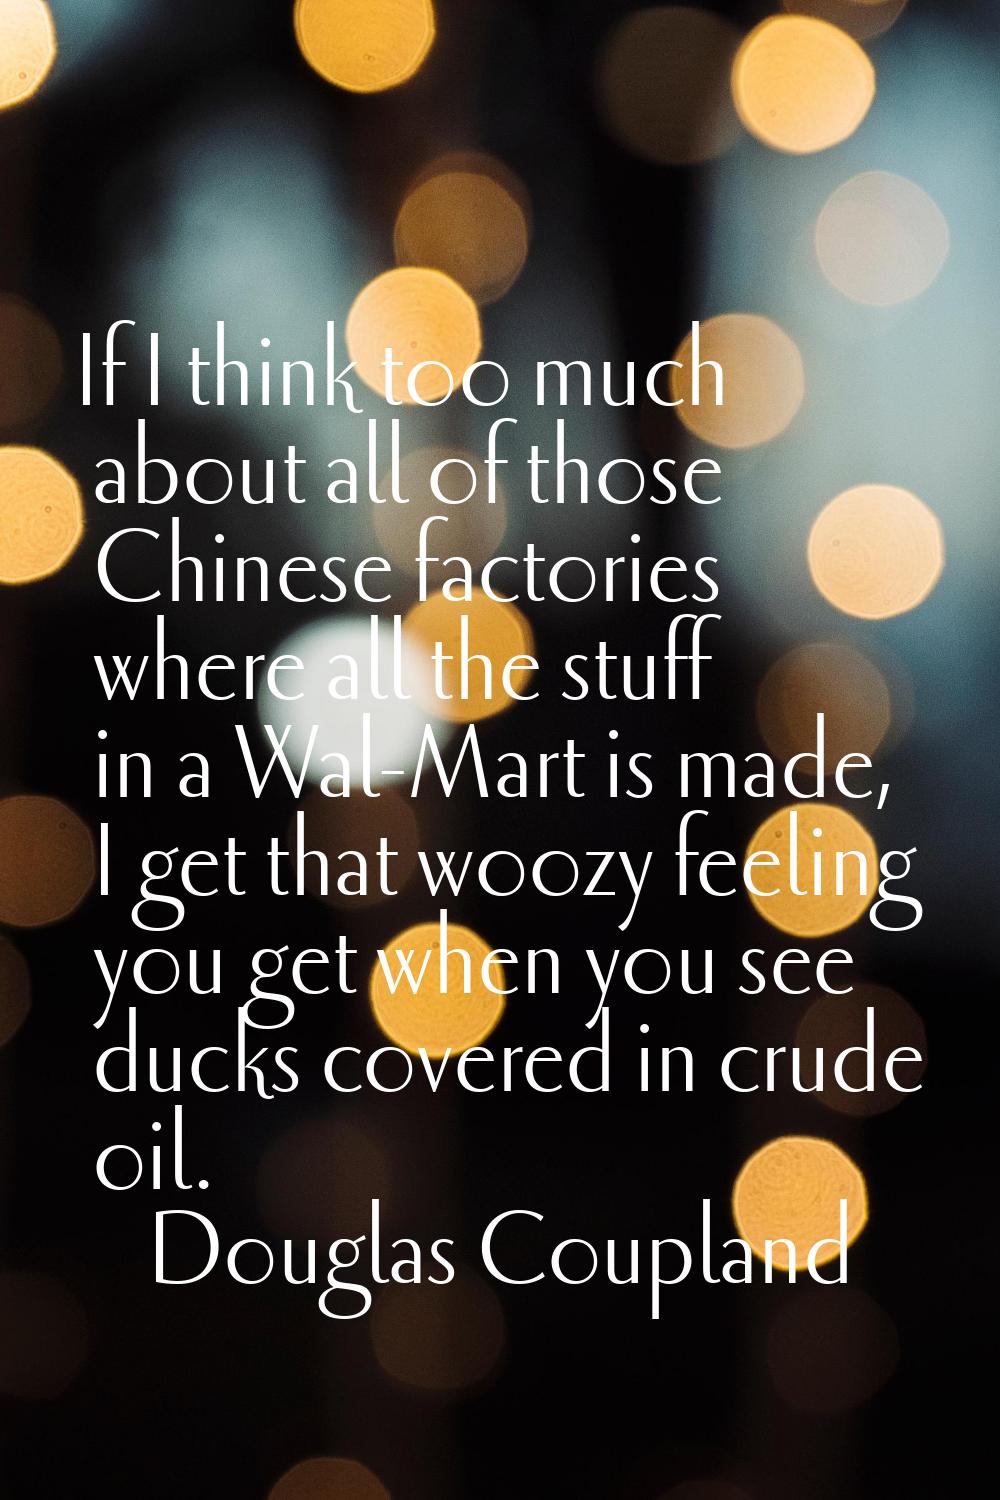 If I think too much about all of those Chinese factories where all the stuff in a Wal-Mart is made,